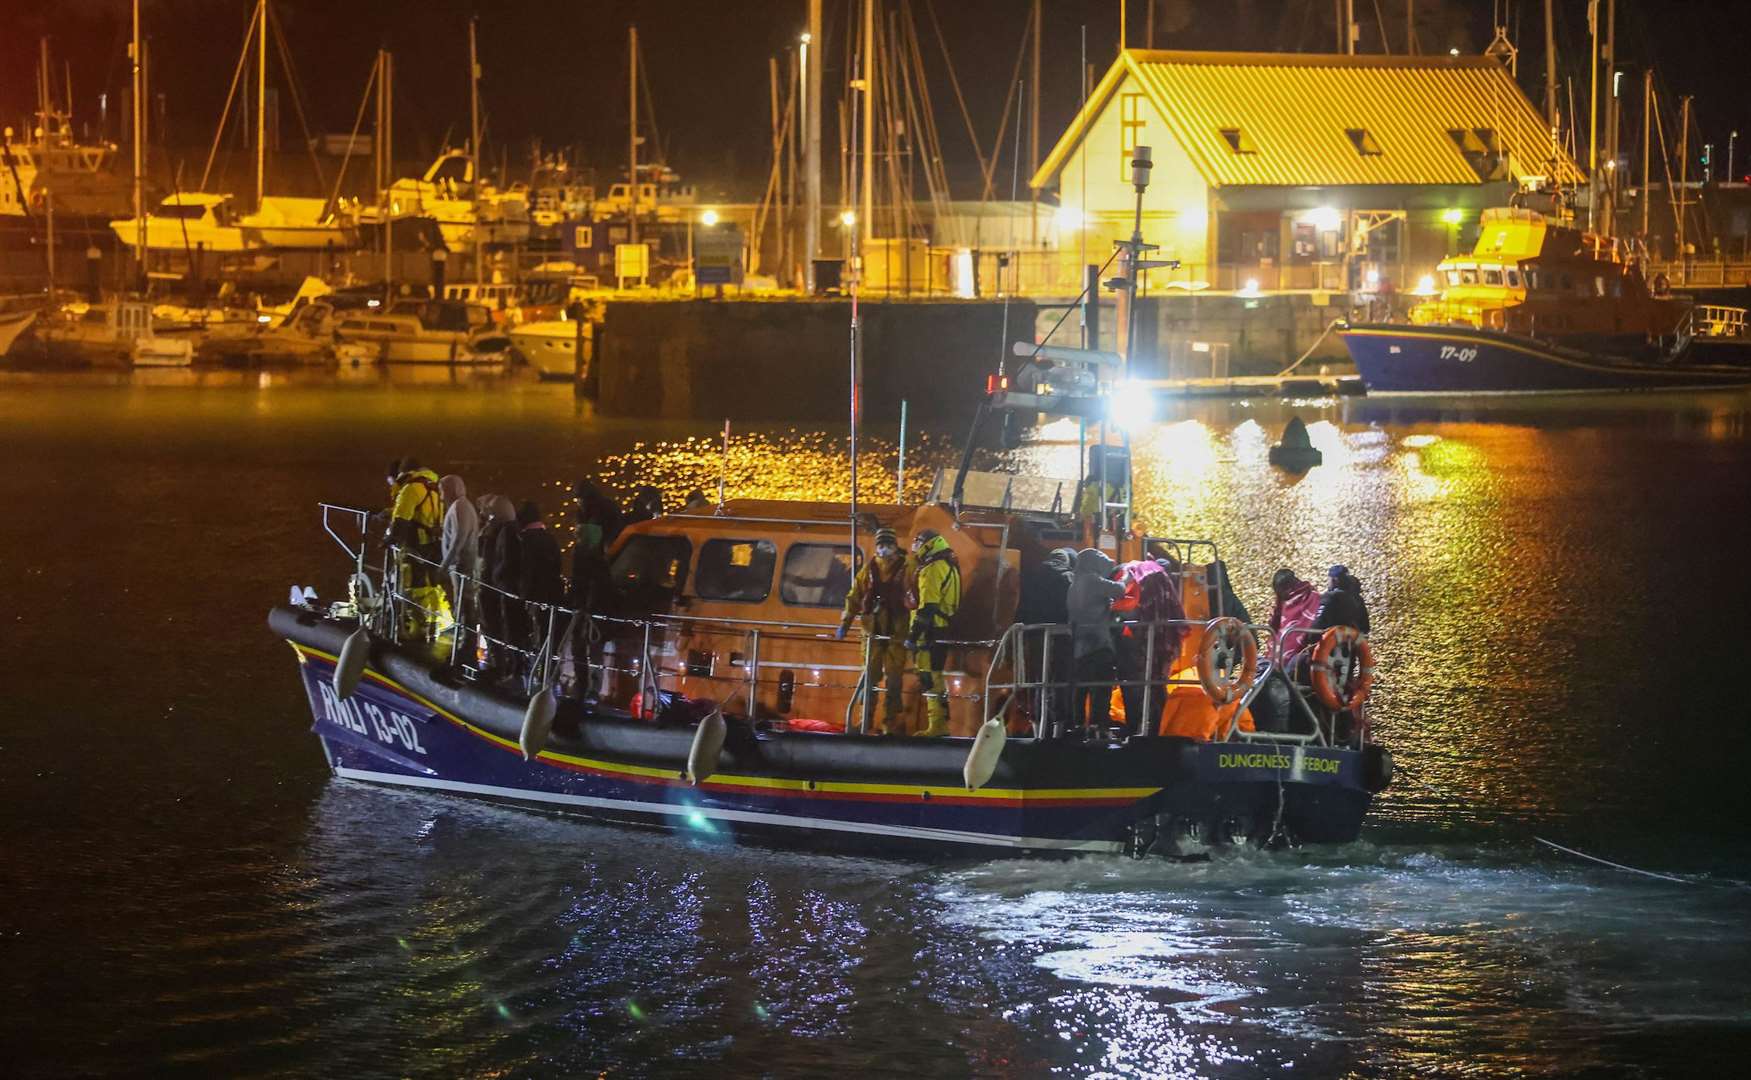 People were rescued from small boats by the lifeboat